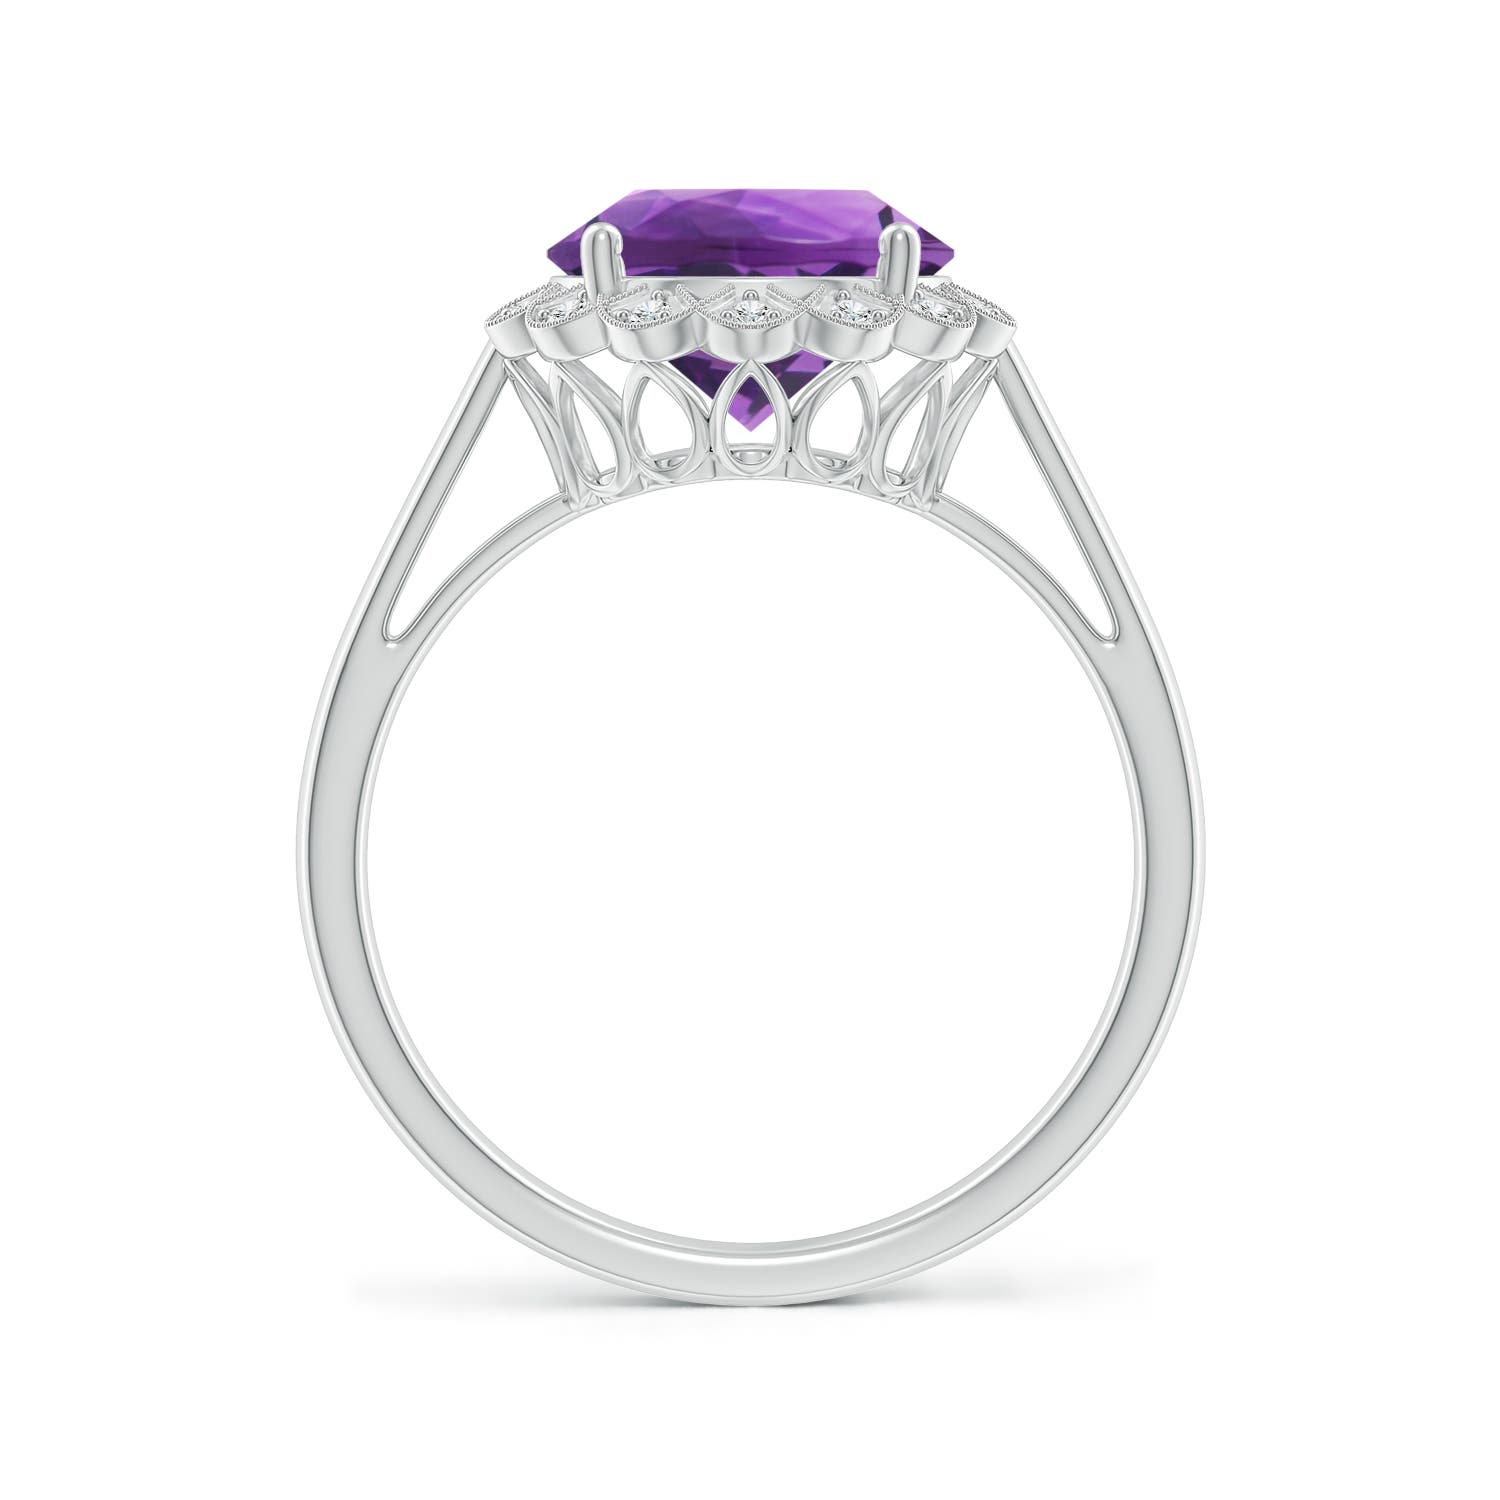 AAA - Amethyst / 2.52 CT / 14 KT White Gold